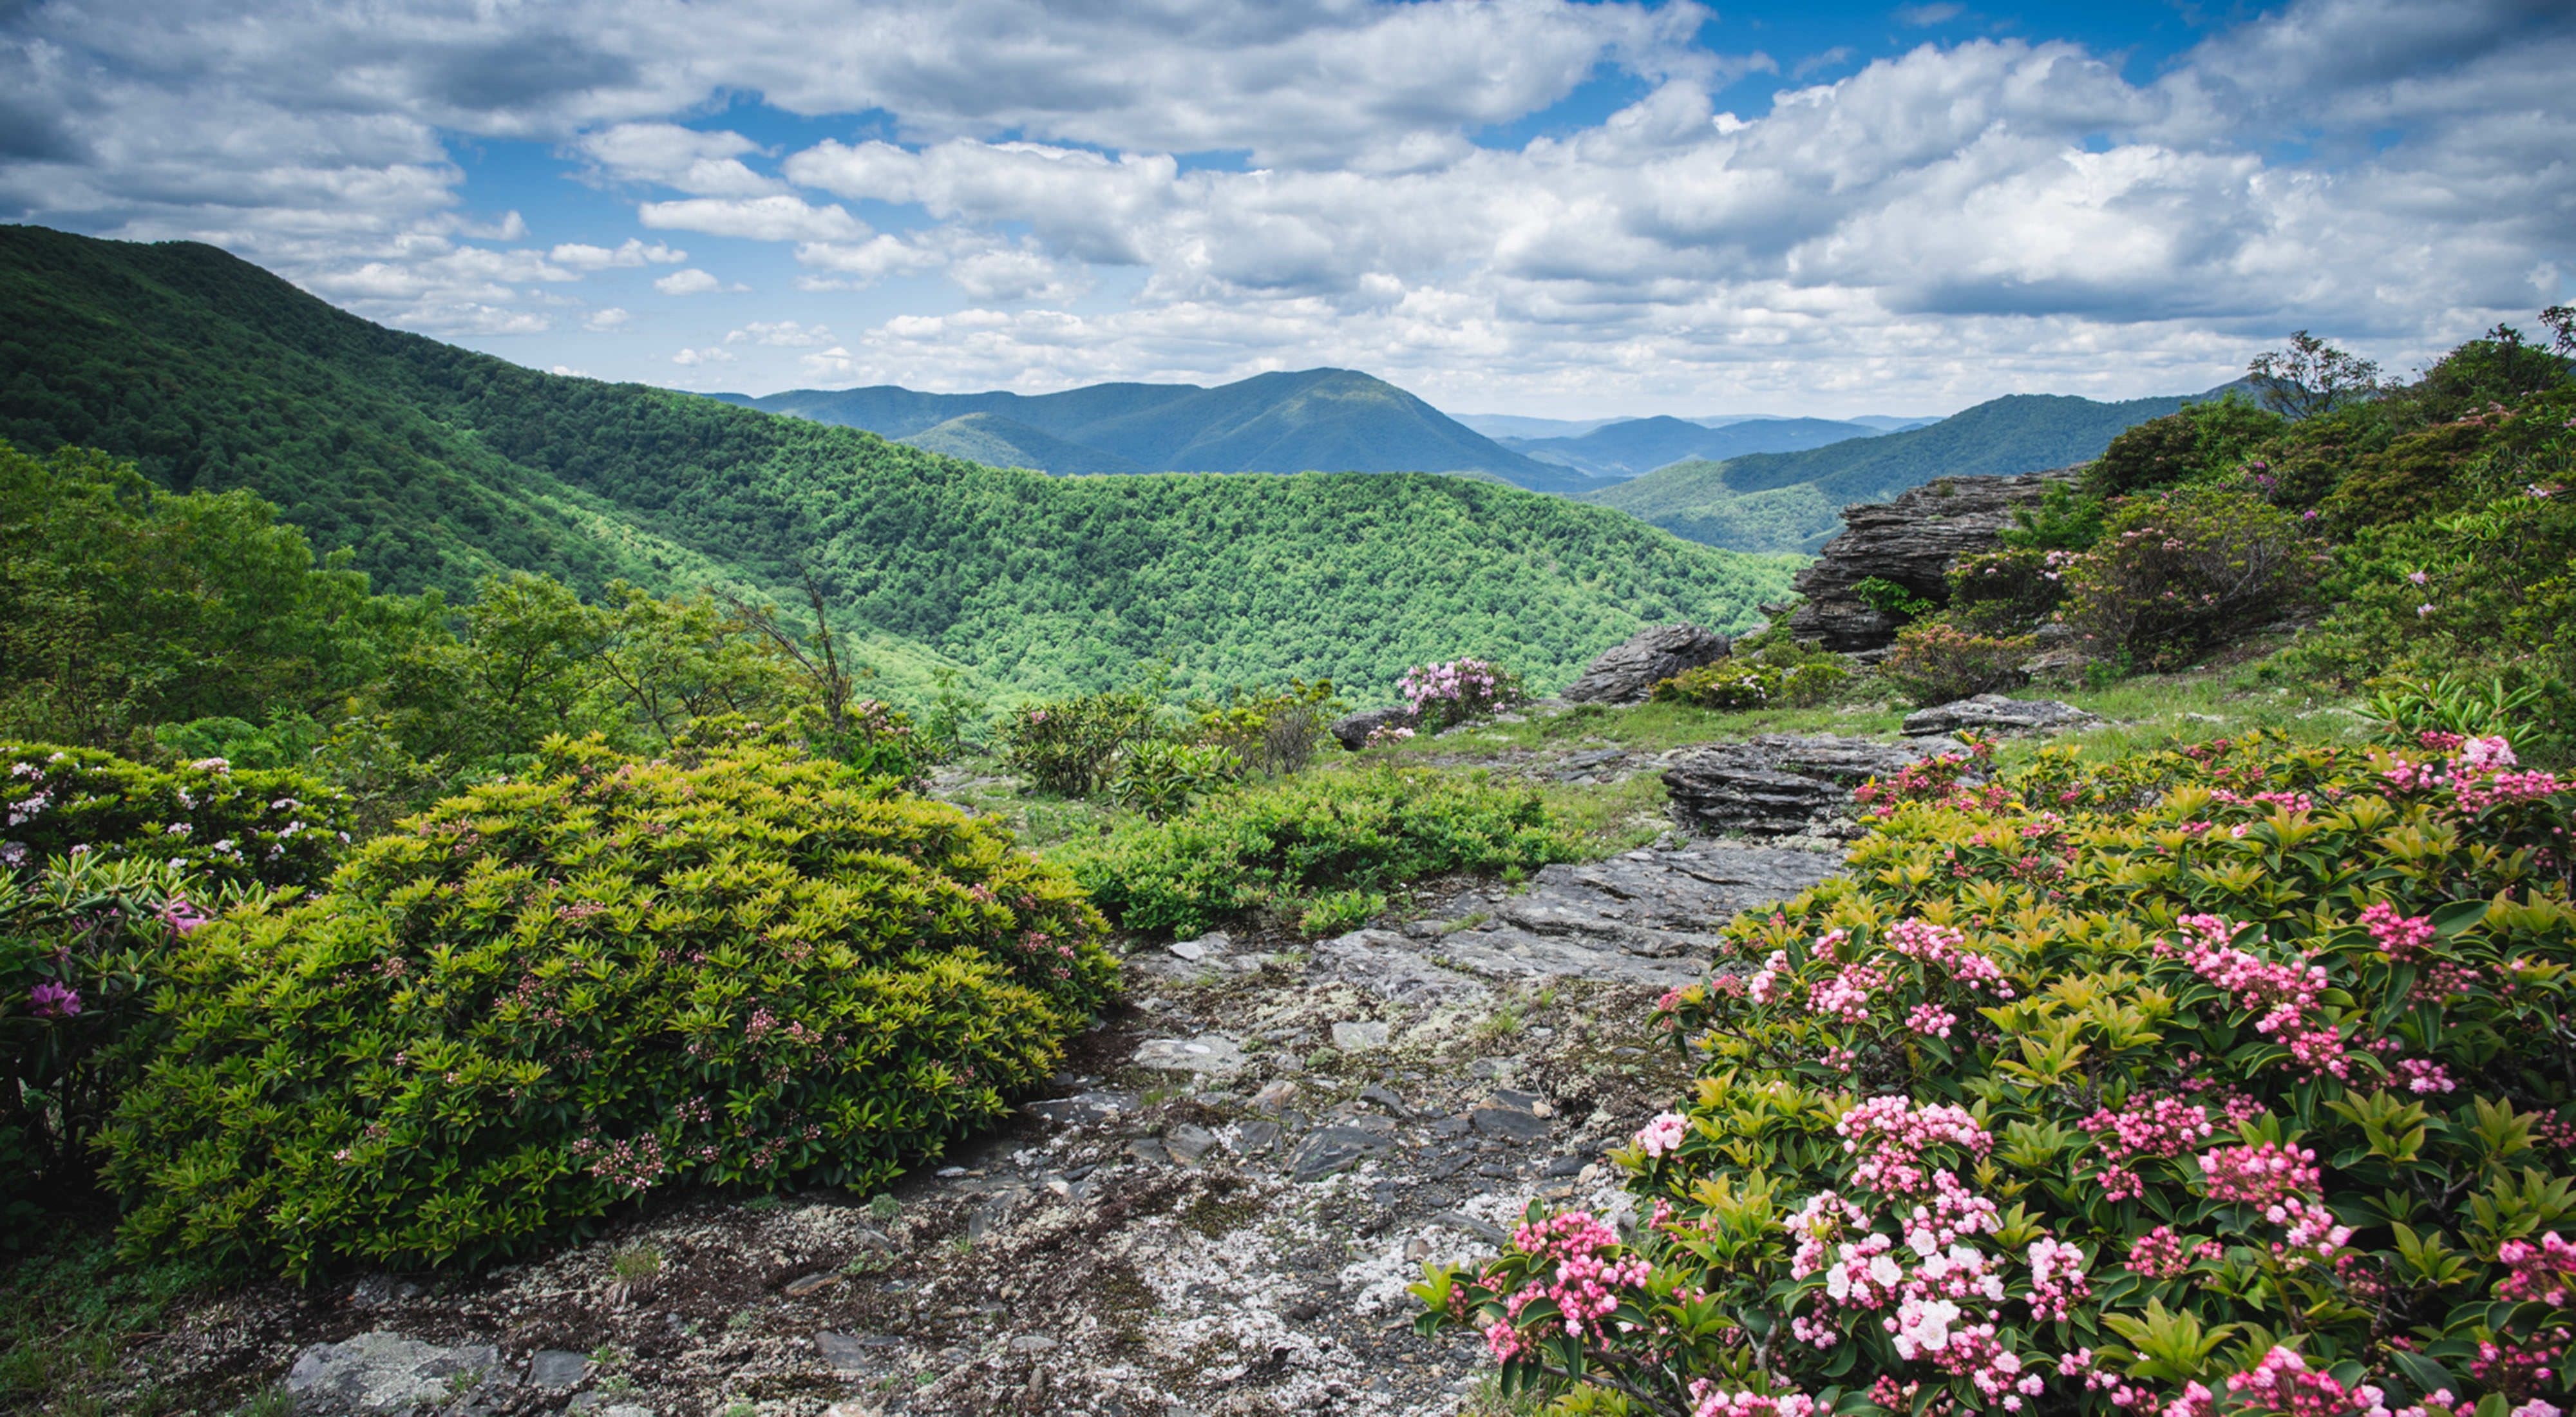 Rocky outcrops, green hills and shrubs blooming with pink flowers ar Bluff Mountain Preserve.